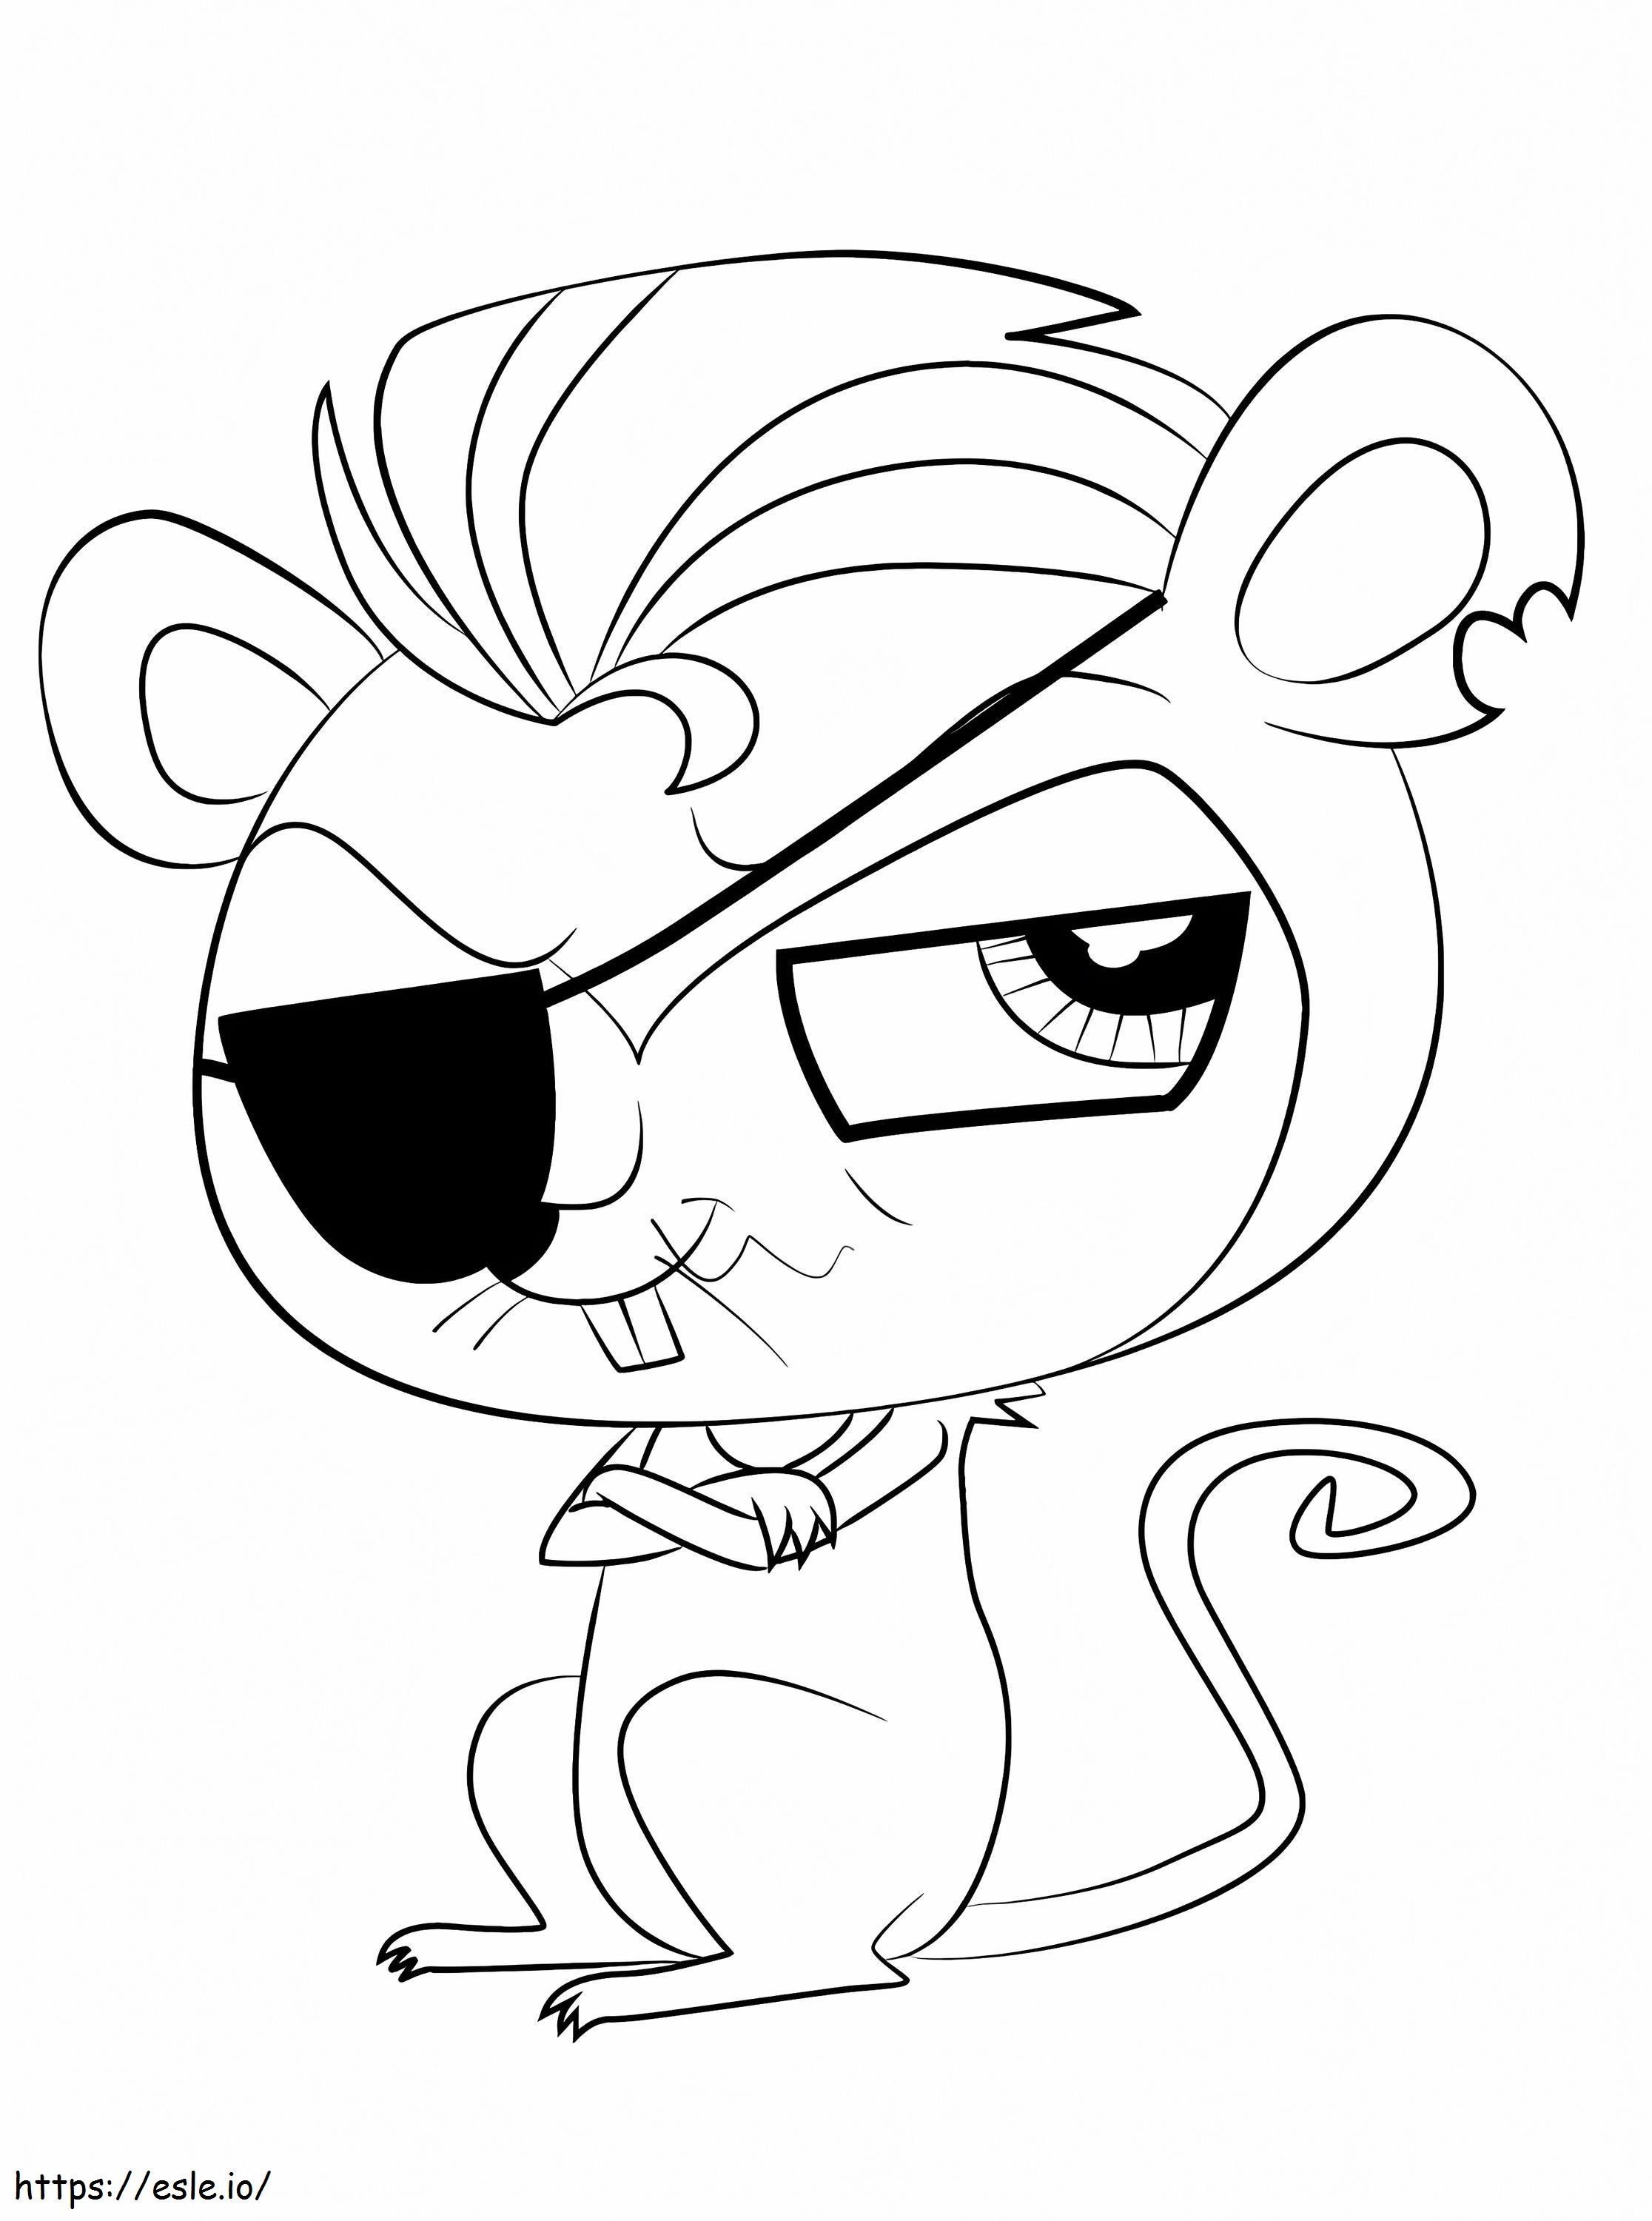 1589789396 How To Draw Pete From Littlest Pet Shop Step 0 coloring page